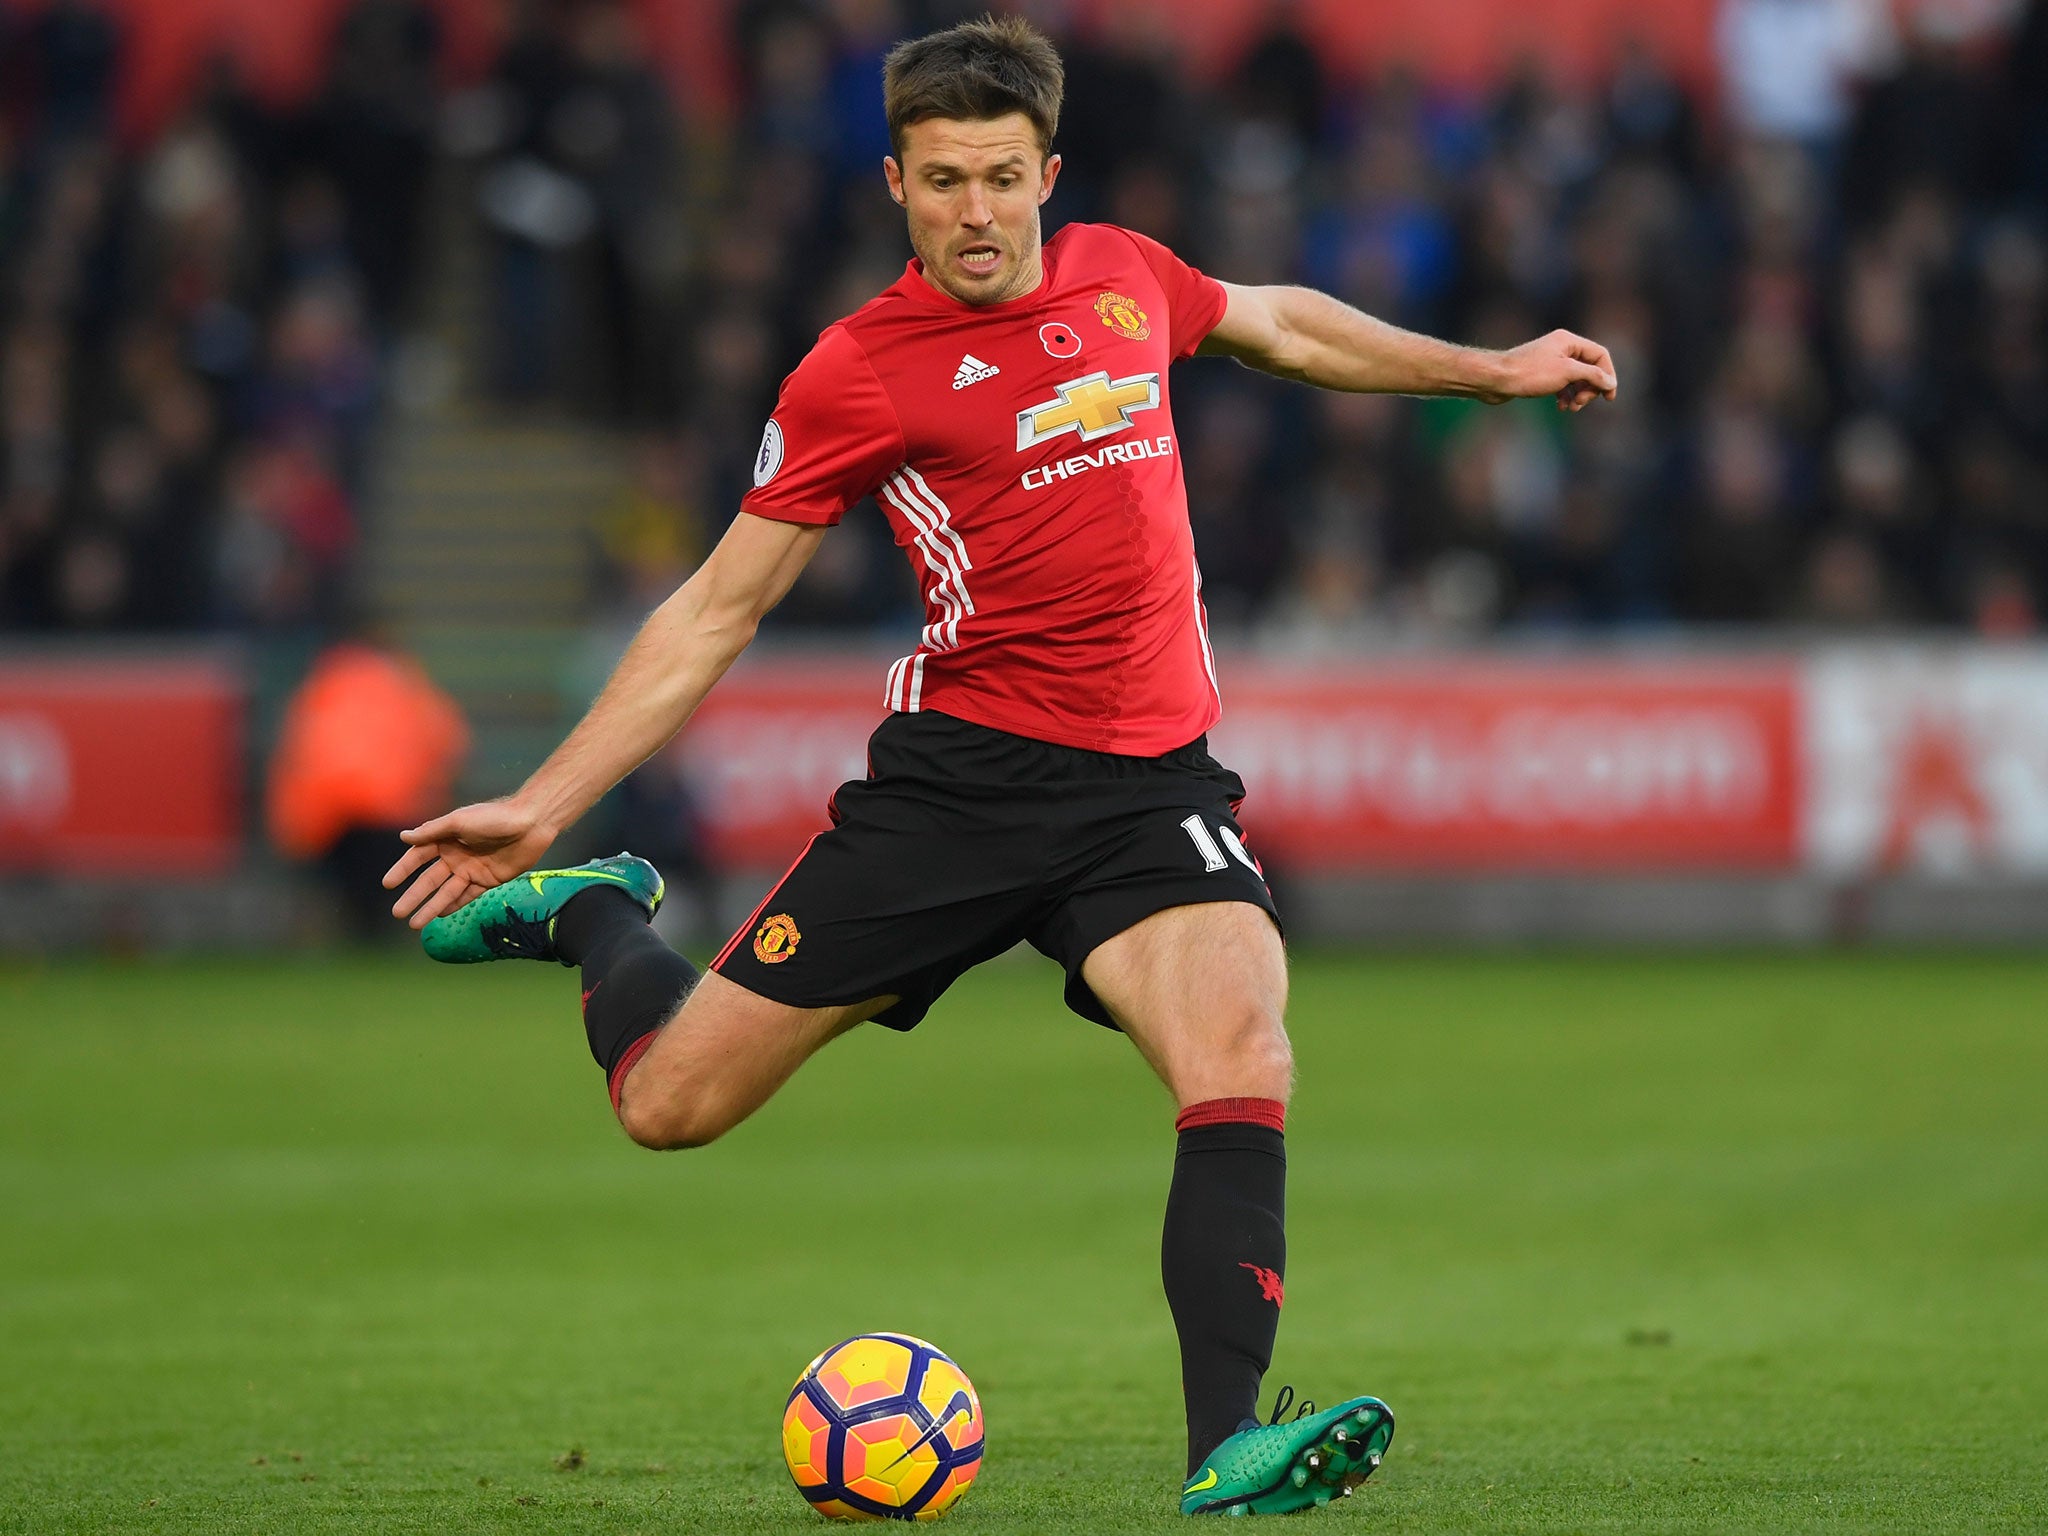 Michael Carrick admitted he may need to leave Manchester United with his contract up at the end of the season